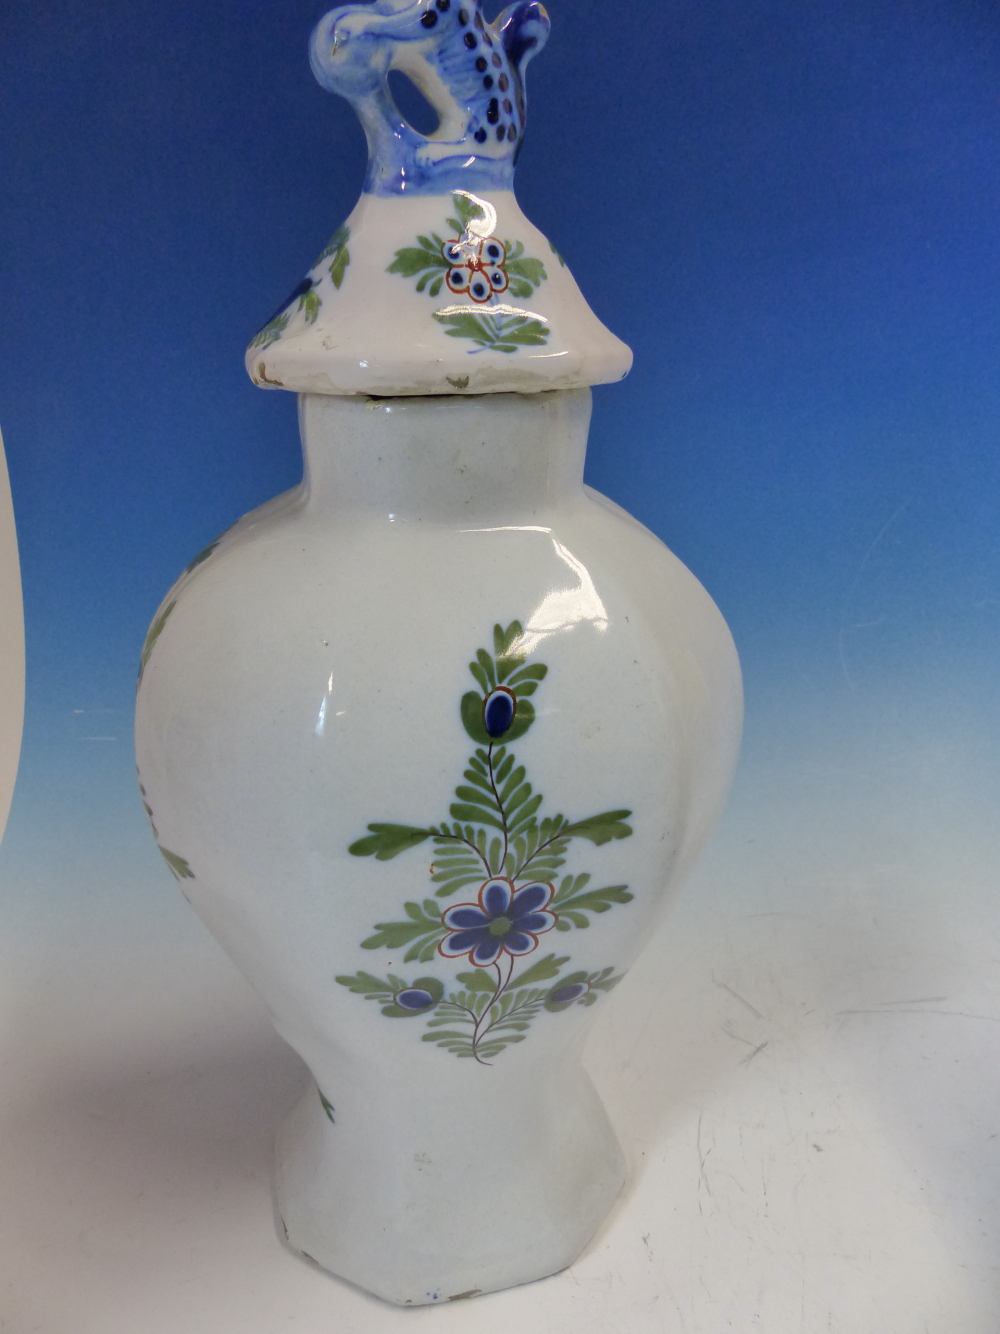 TWO 19th C. DUTCH DELFT POLYCHROME VASES AND COVERS OF FLATTENED BALUSTER SHAPE, ONE PAINTED WITH - Image 7 of 14